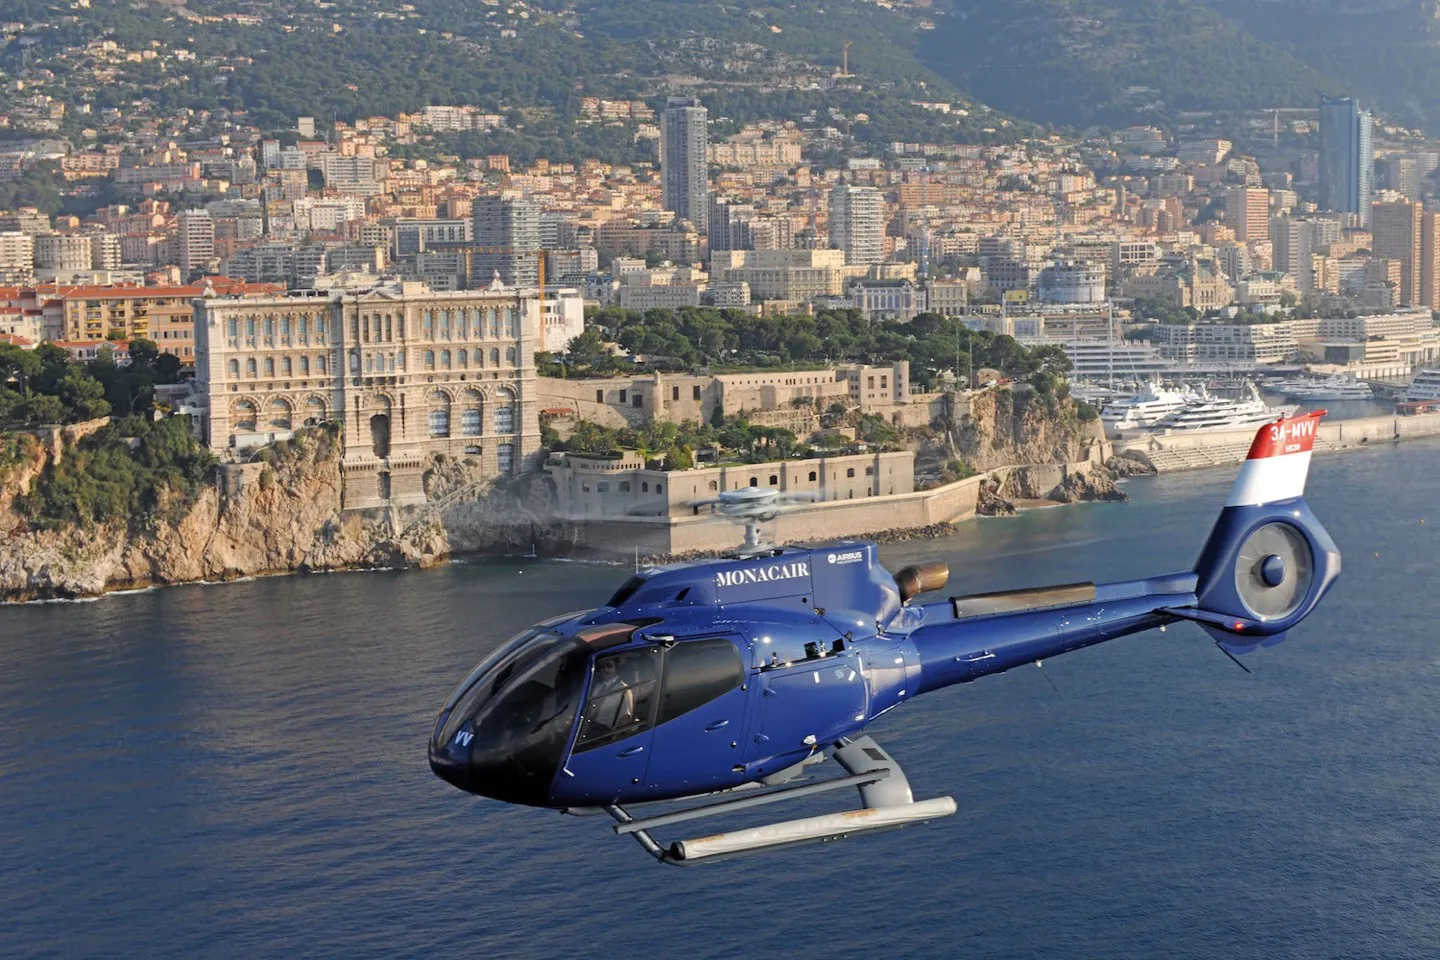 Helicopter into Monaco each day for the F1 Grand Prix race weekend